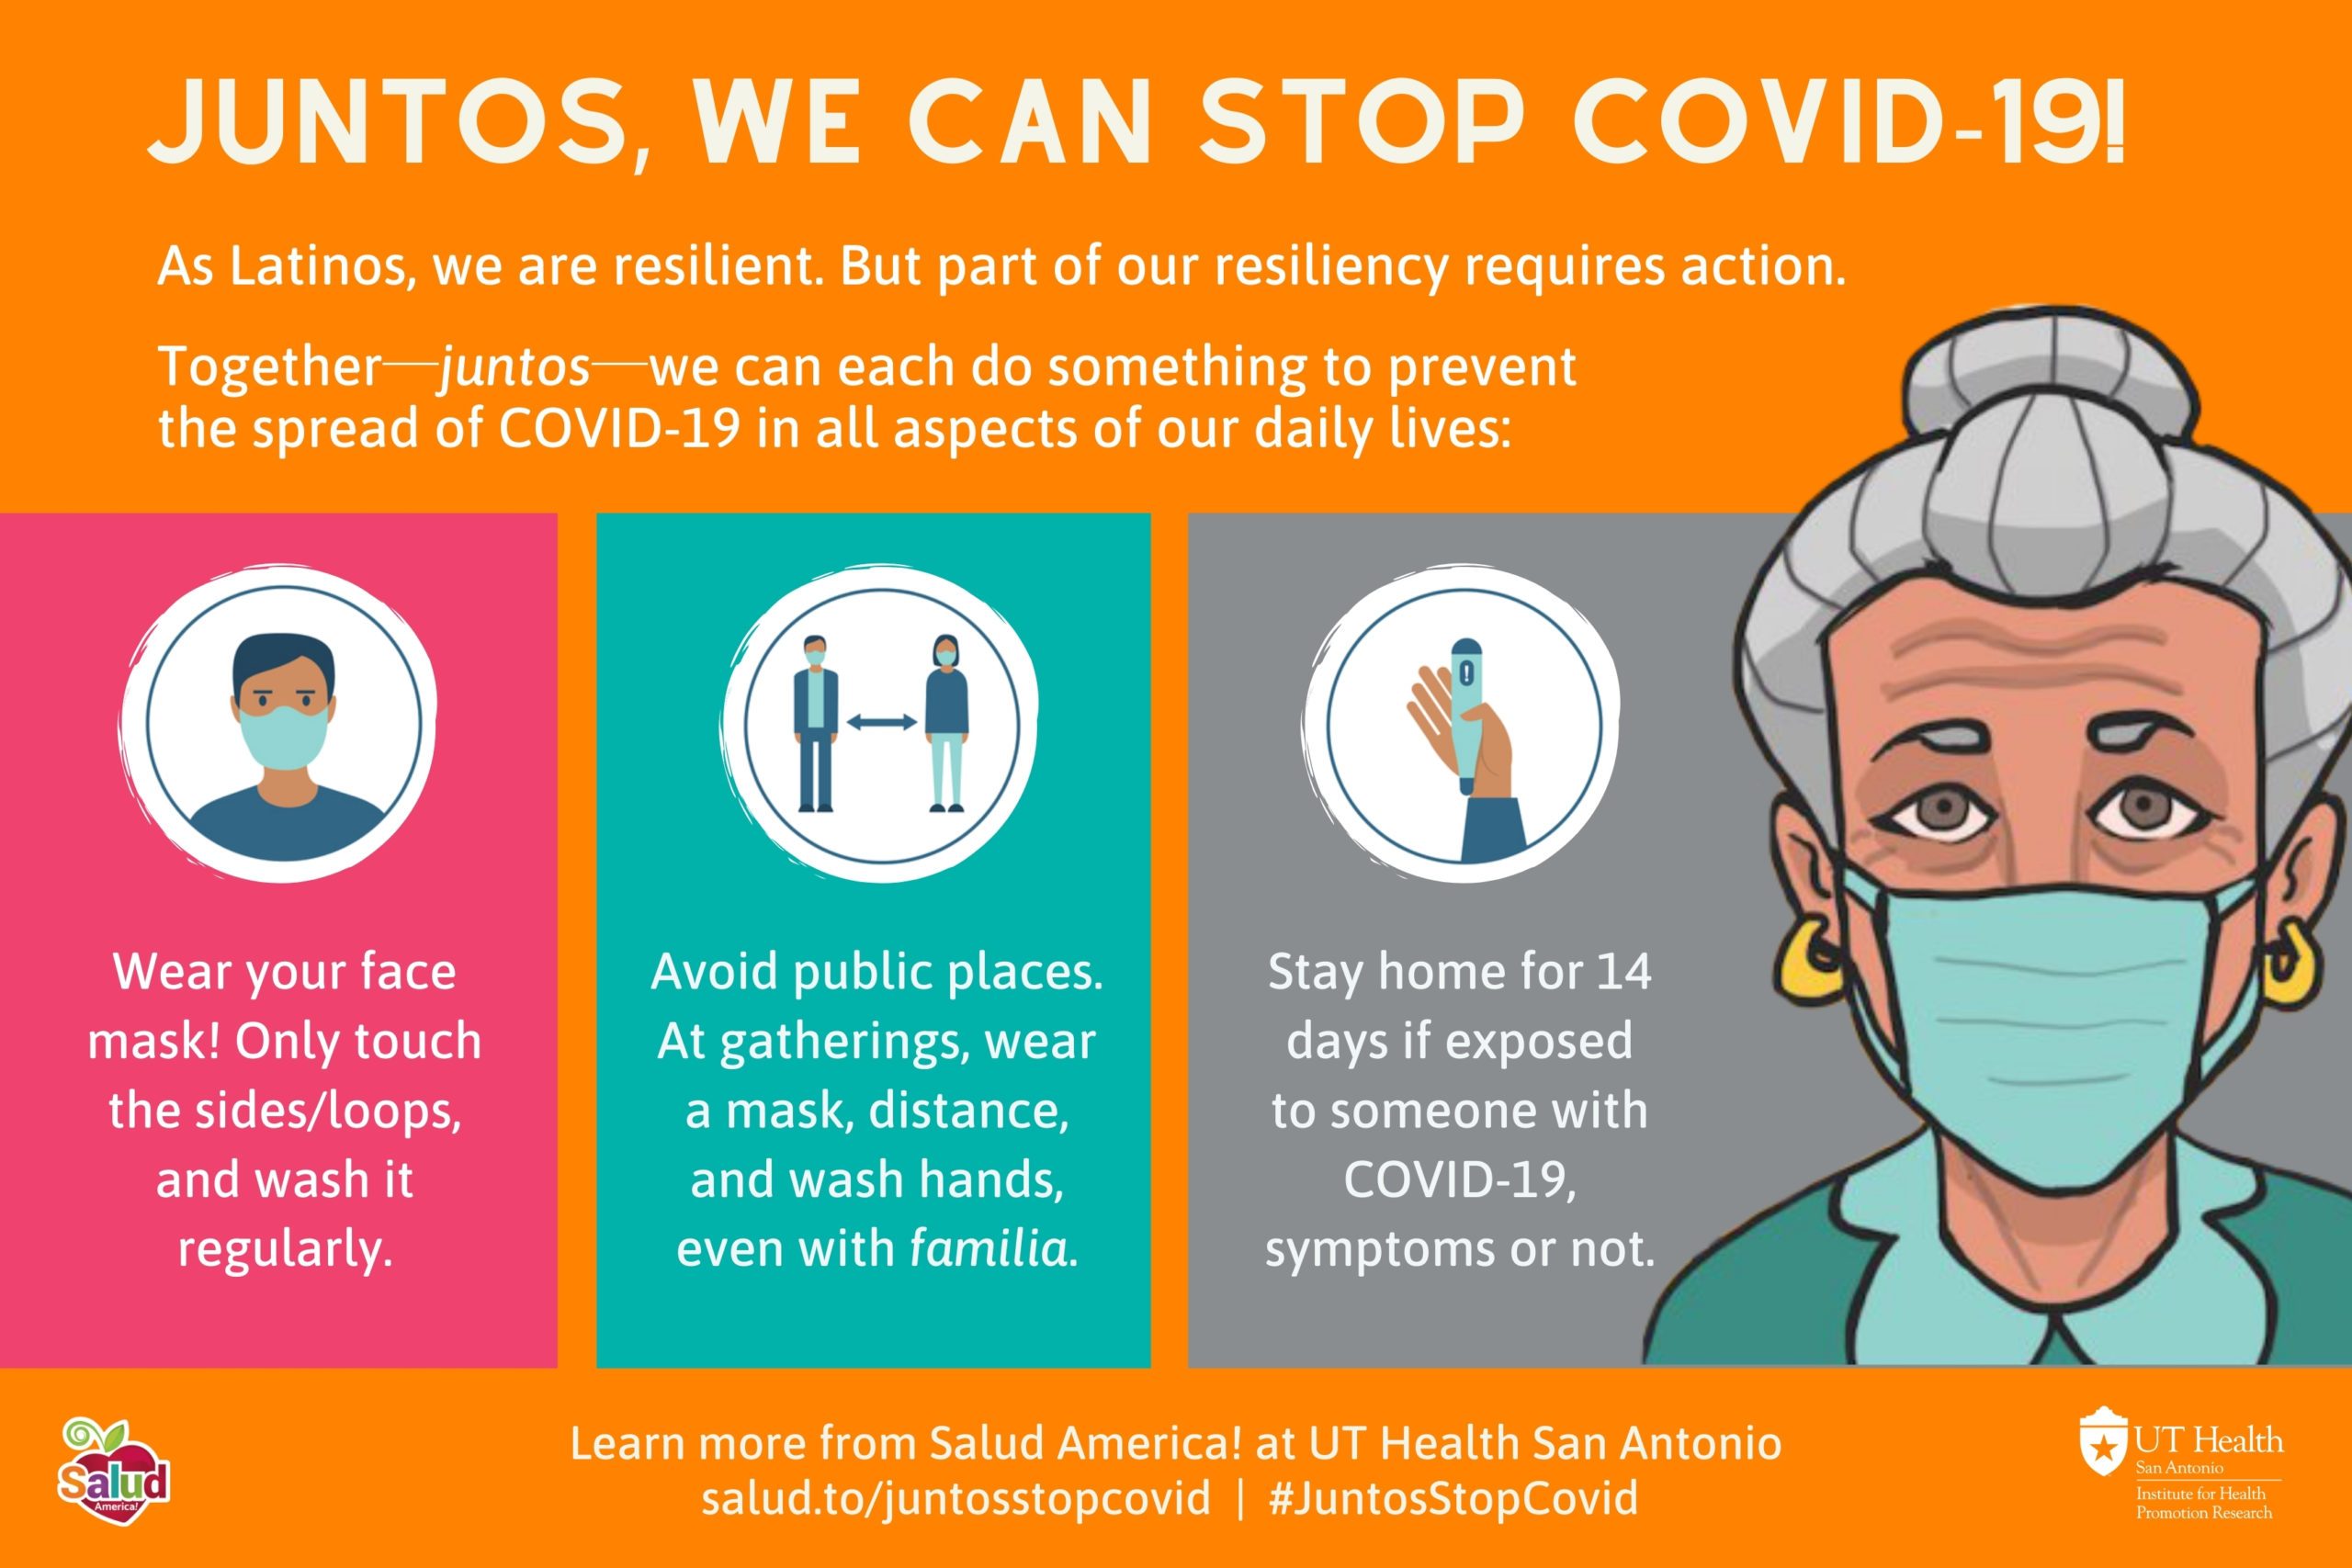 Overview 3: Juntos We Can Stop Covid-19 campaign coronavirus